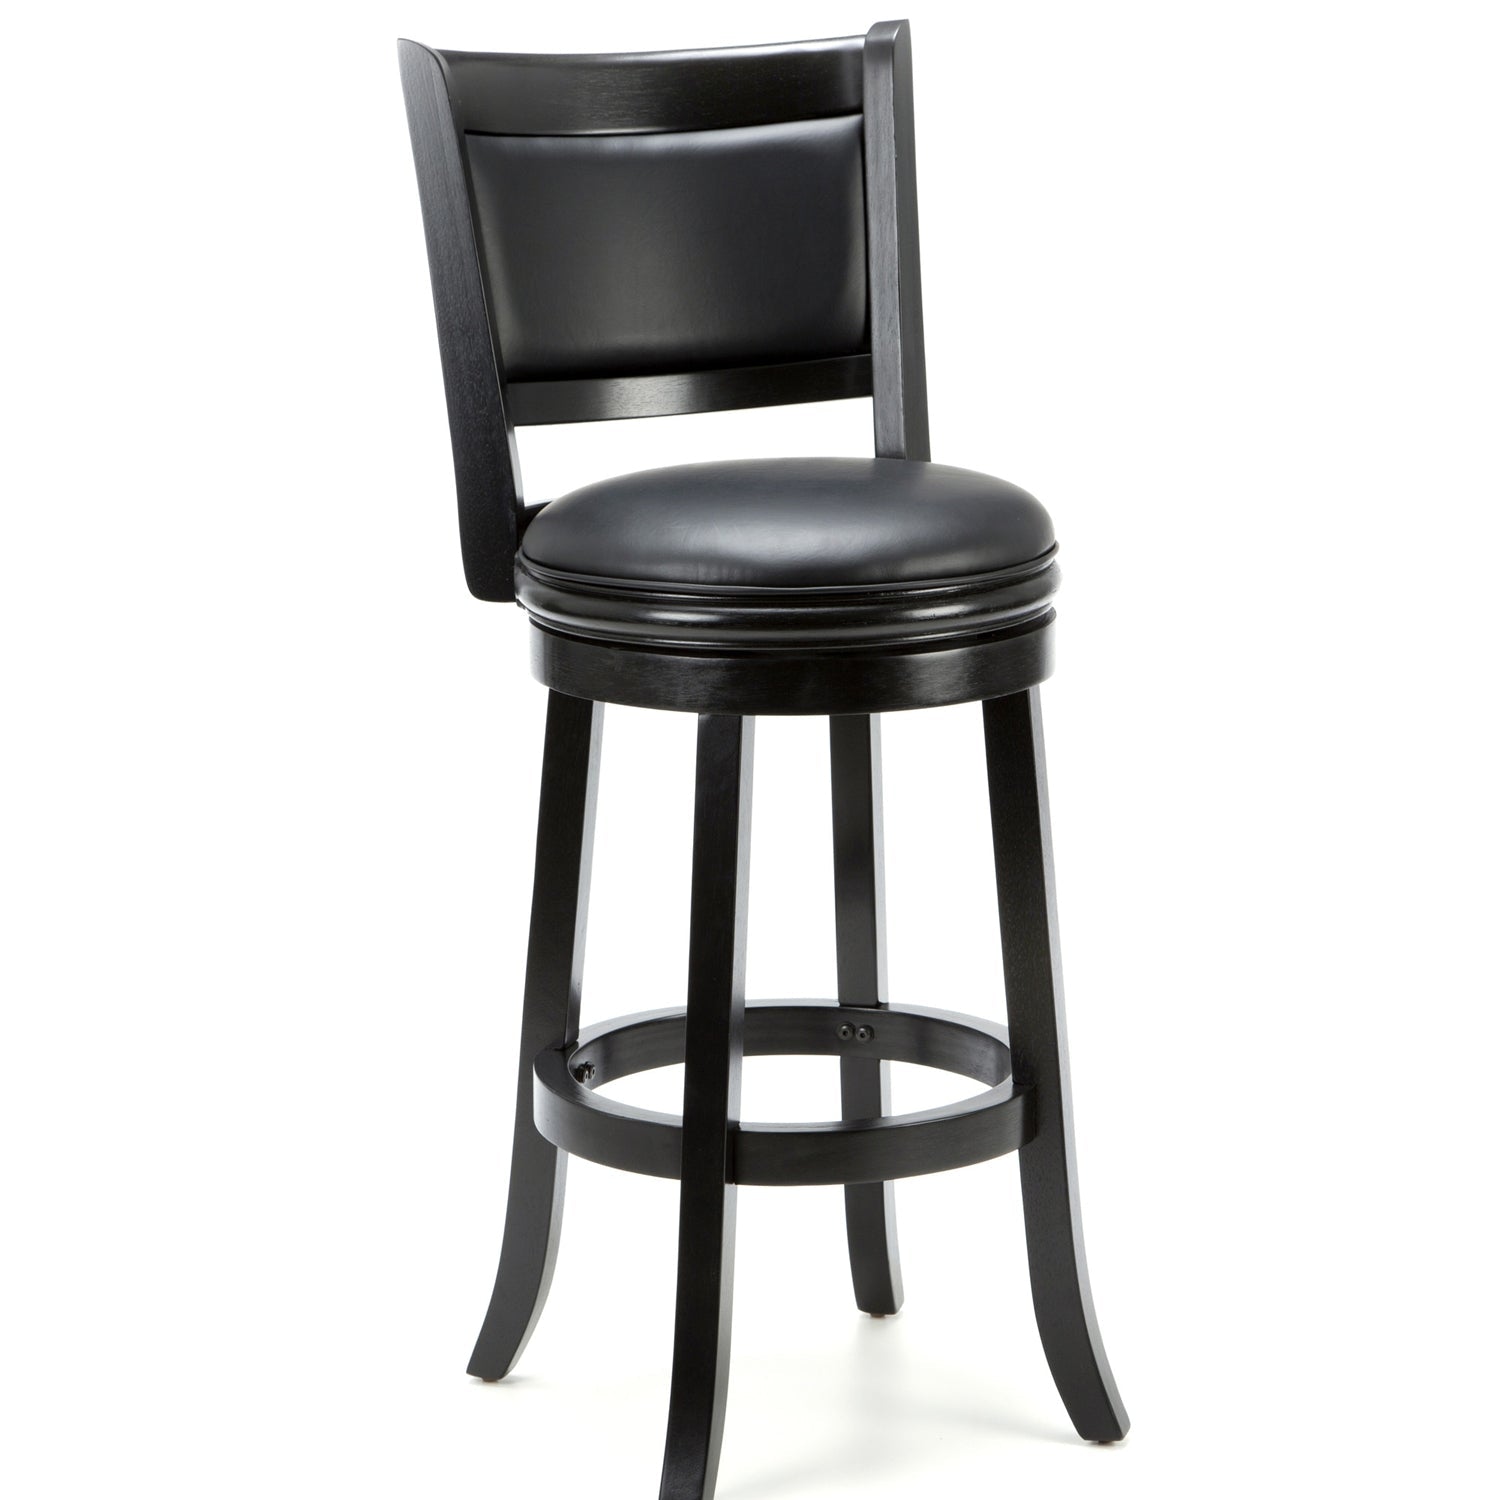 Dining > Barstools - Black 29-inch Swivel Seat Barstool With Faux Leather Cushion Seat